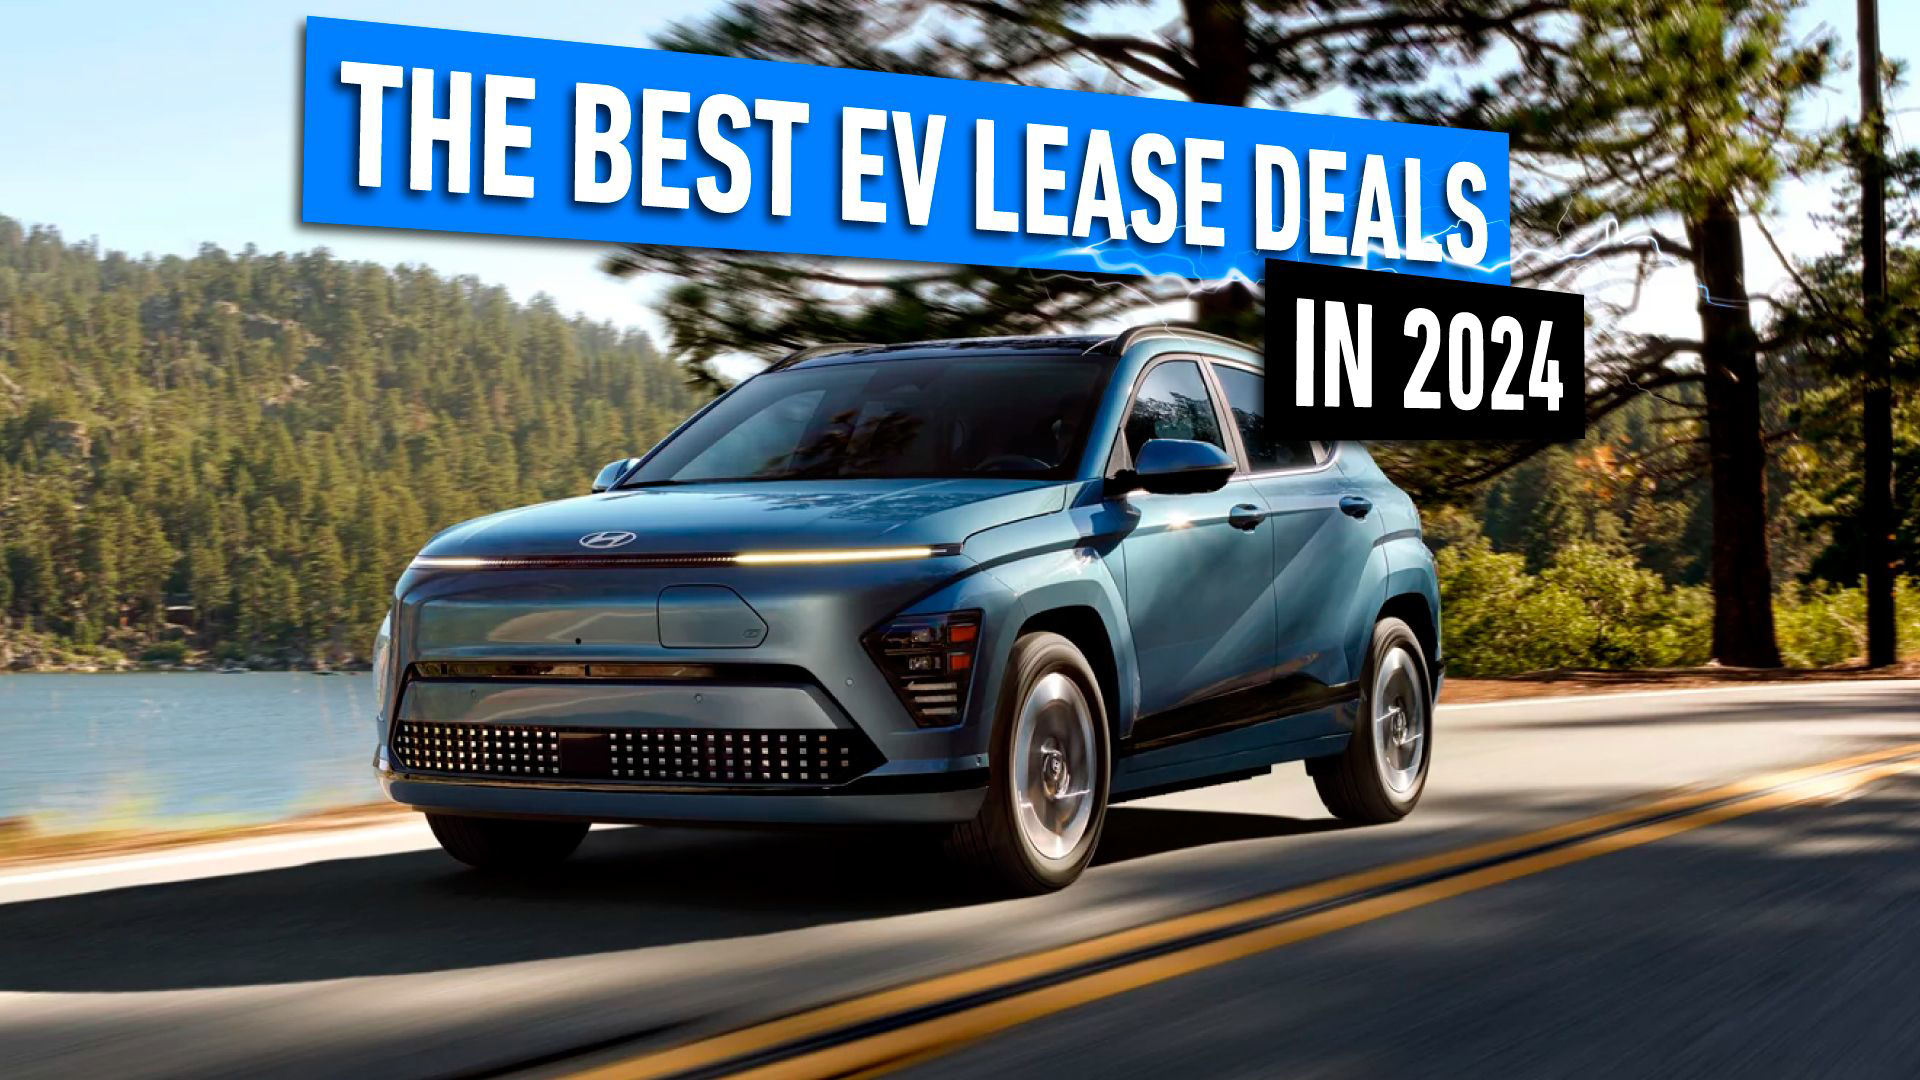 The Best EV Lease Deals In 2024